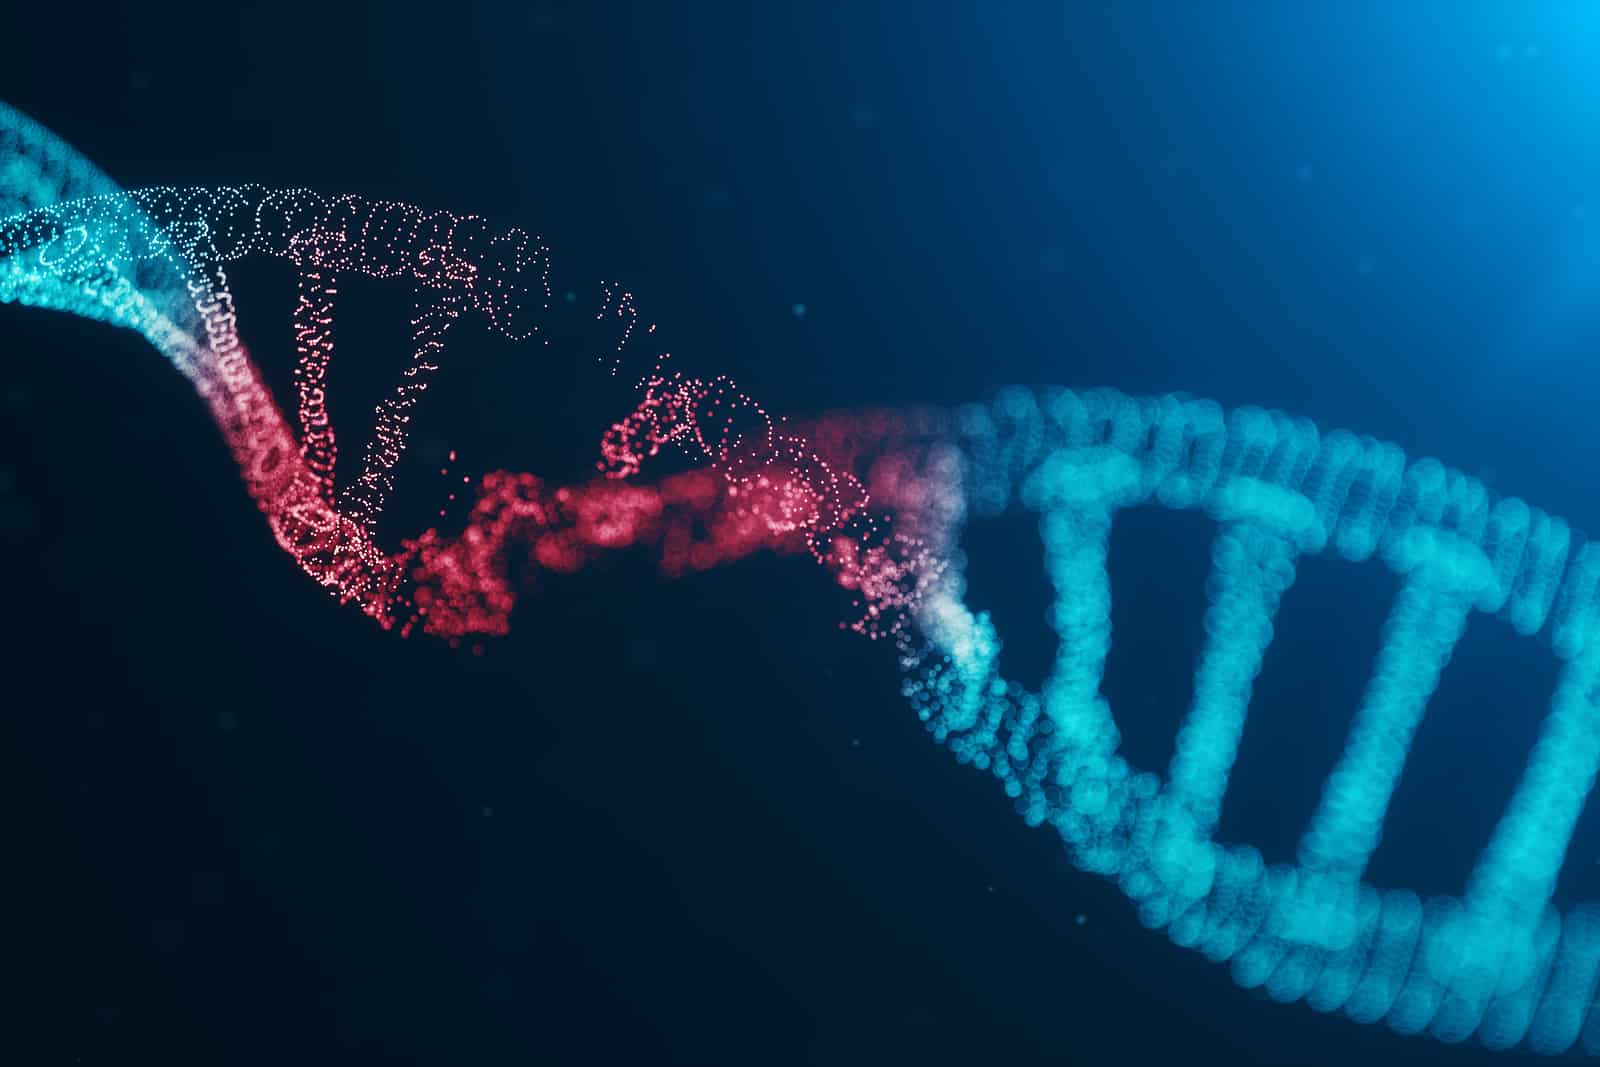 Can Cancer Patients Have Their Genomes Altered Safely?